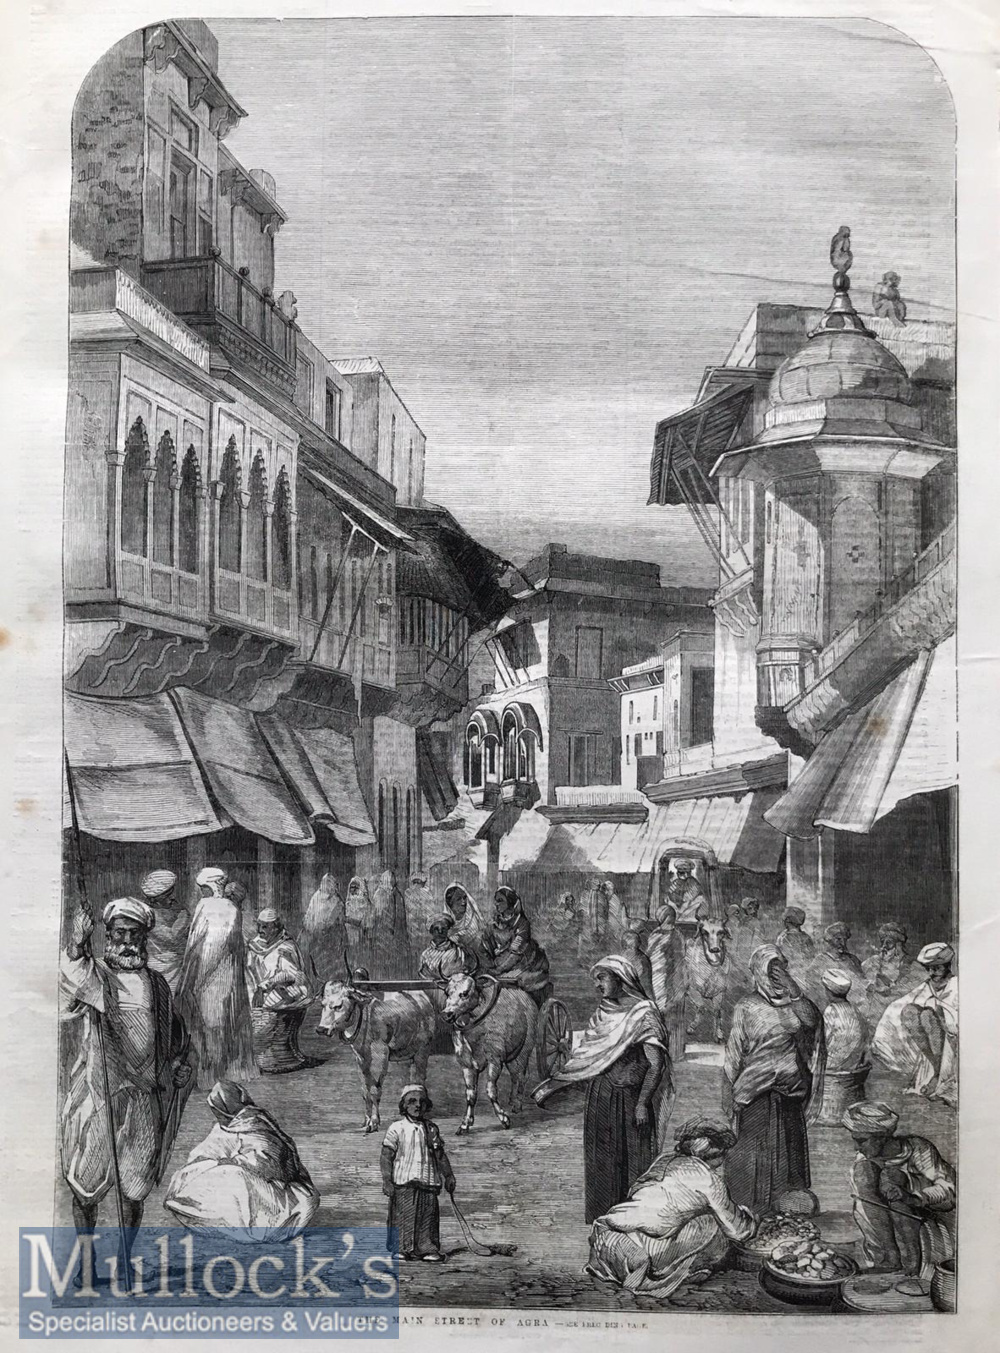 India And Punjab - The Main Street of Agra, 1858 An original ILN wood engraving titled The Main